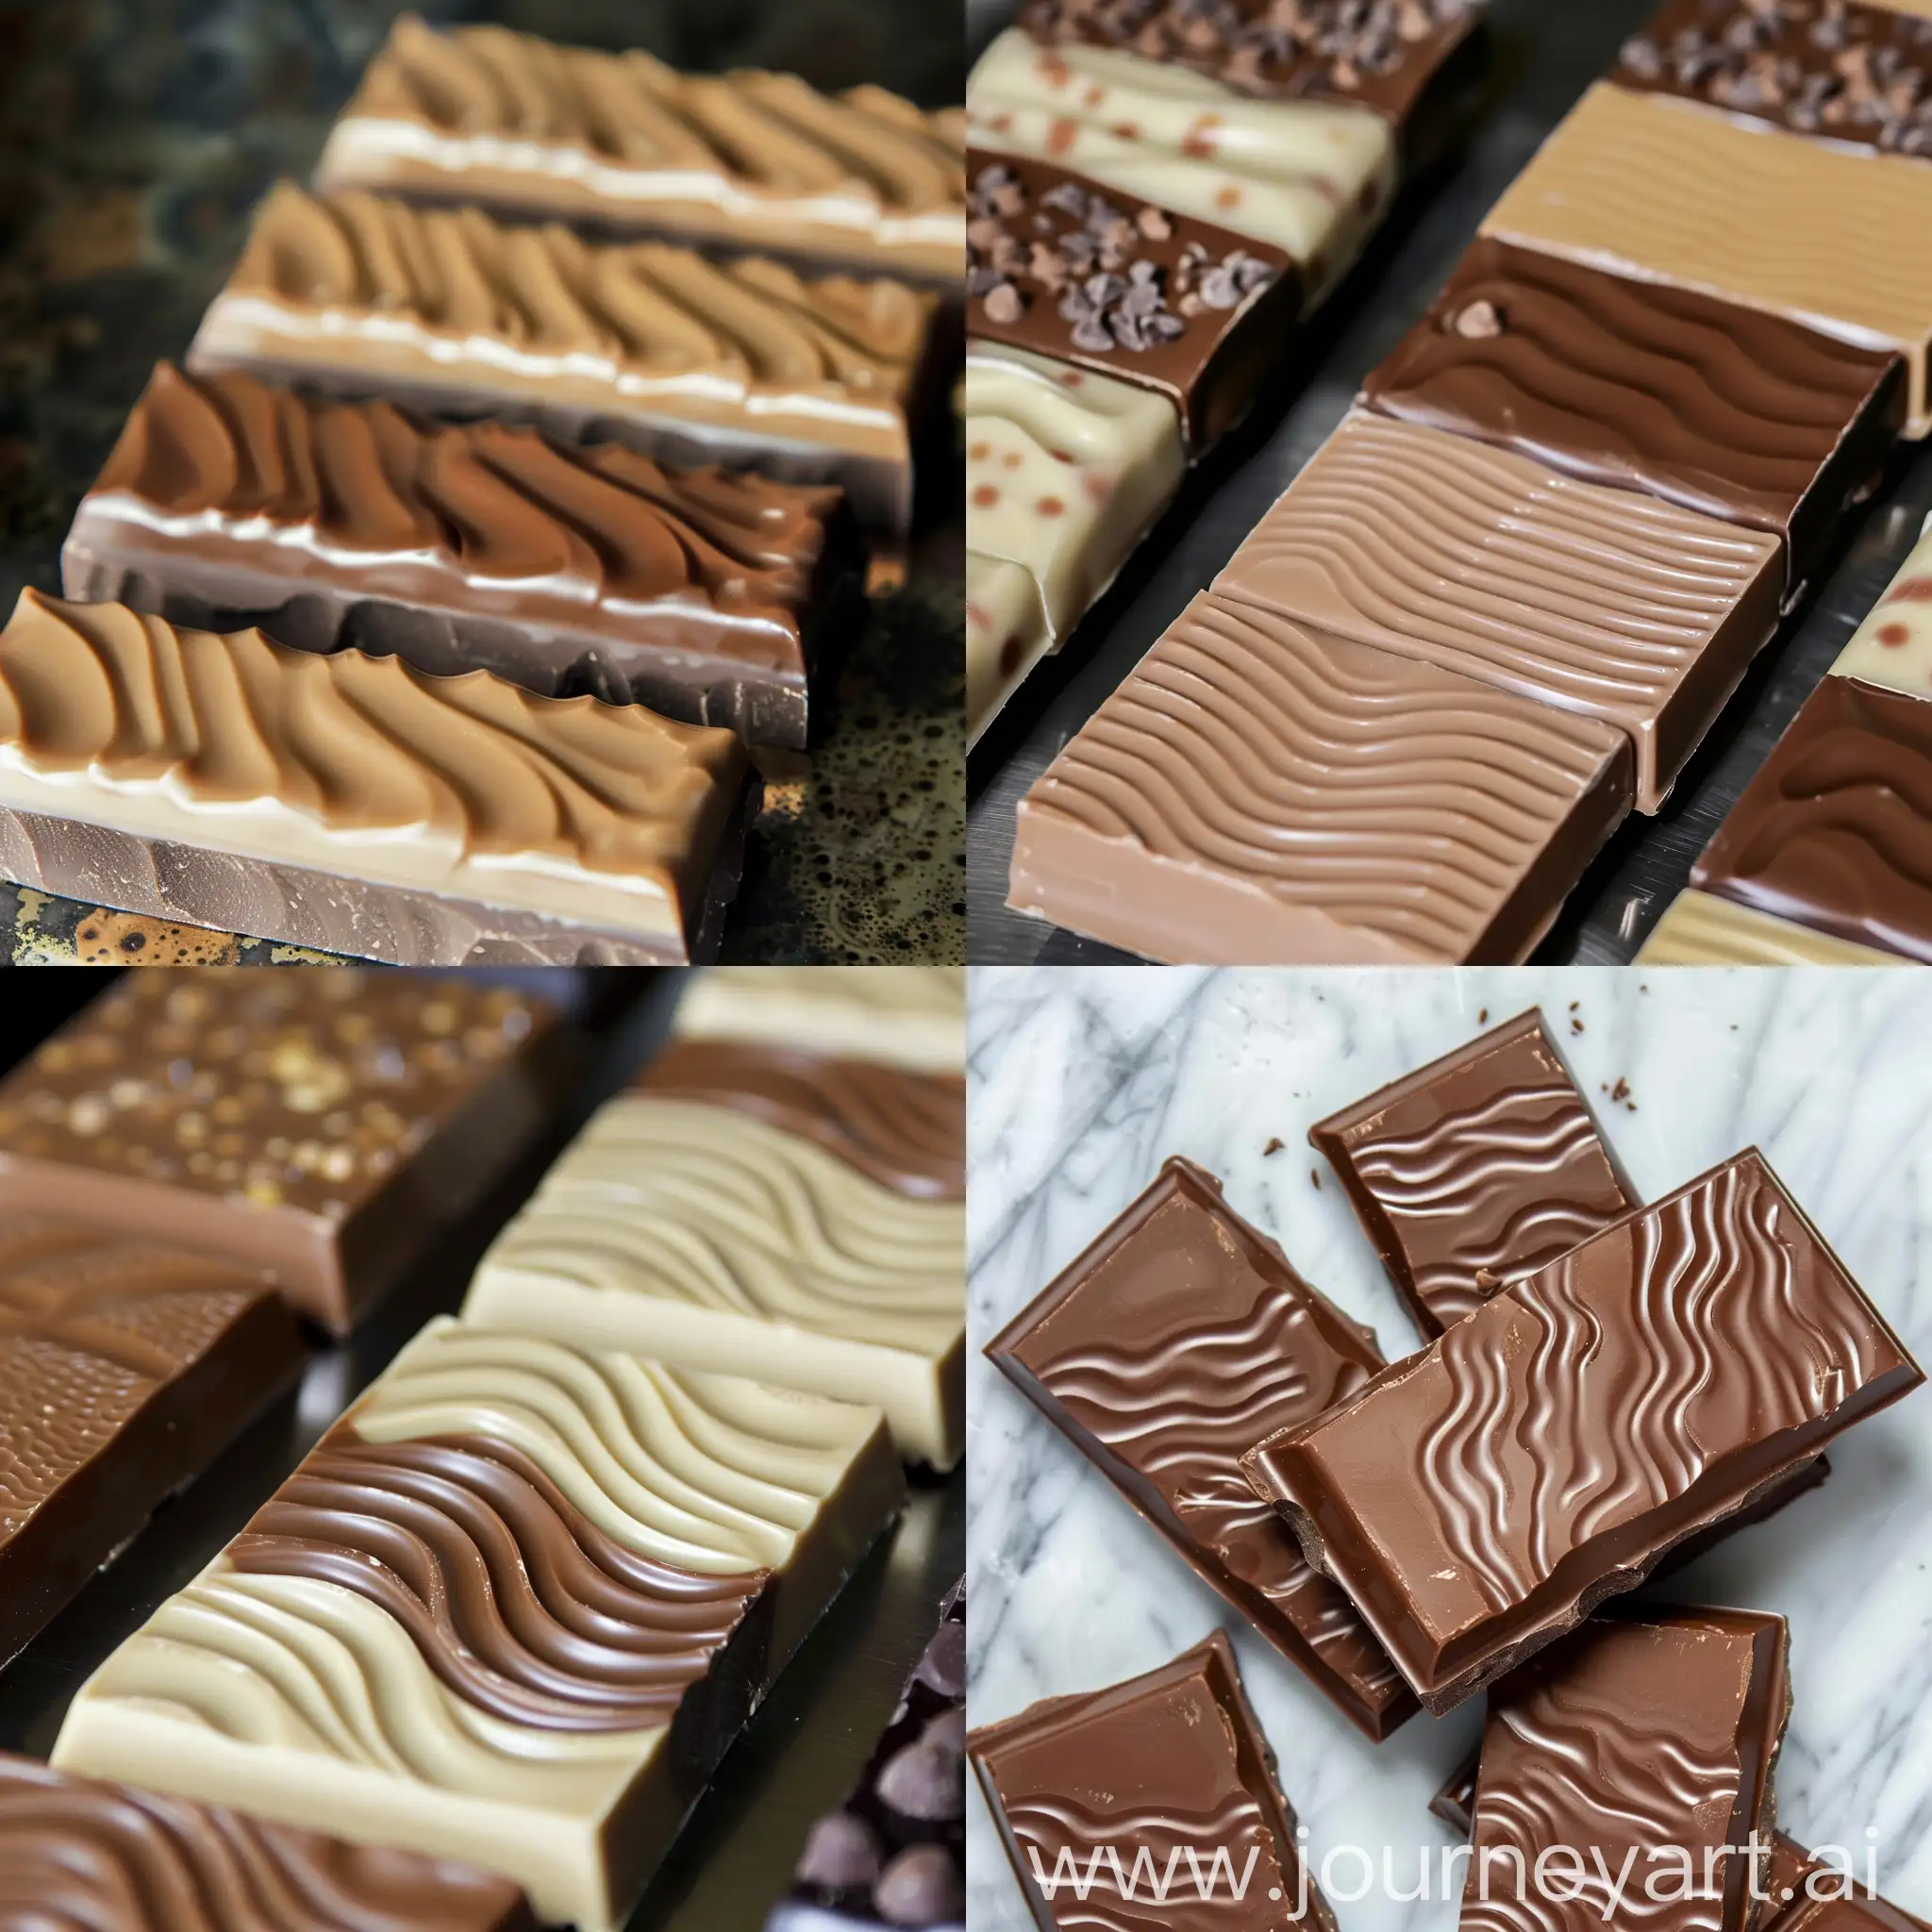 Chocolate bars with river ripples from gourmet Willy Wonka